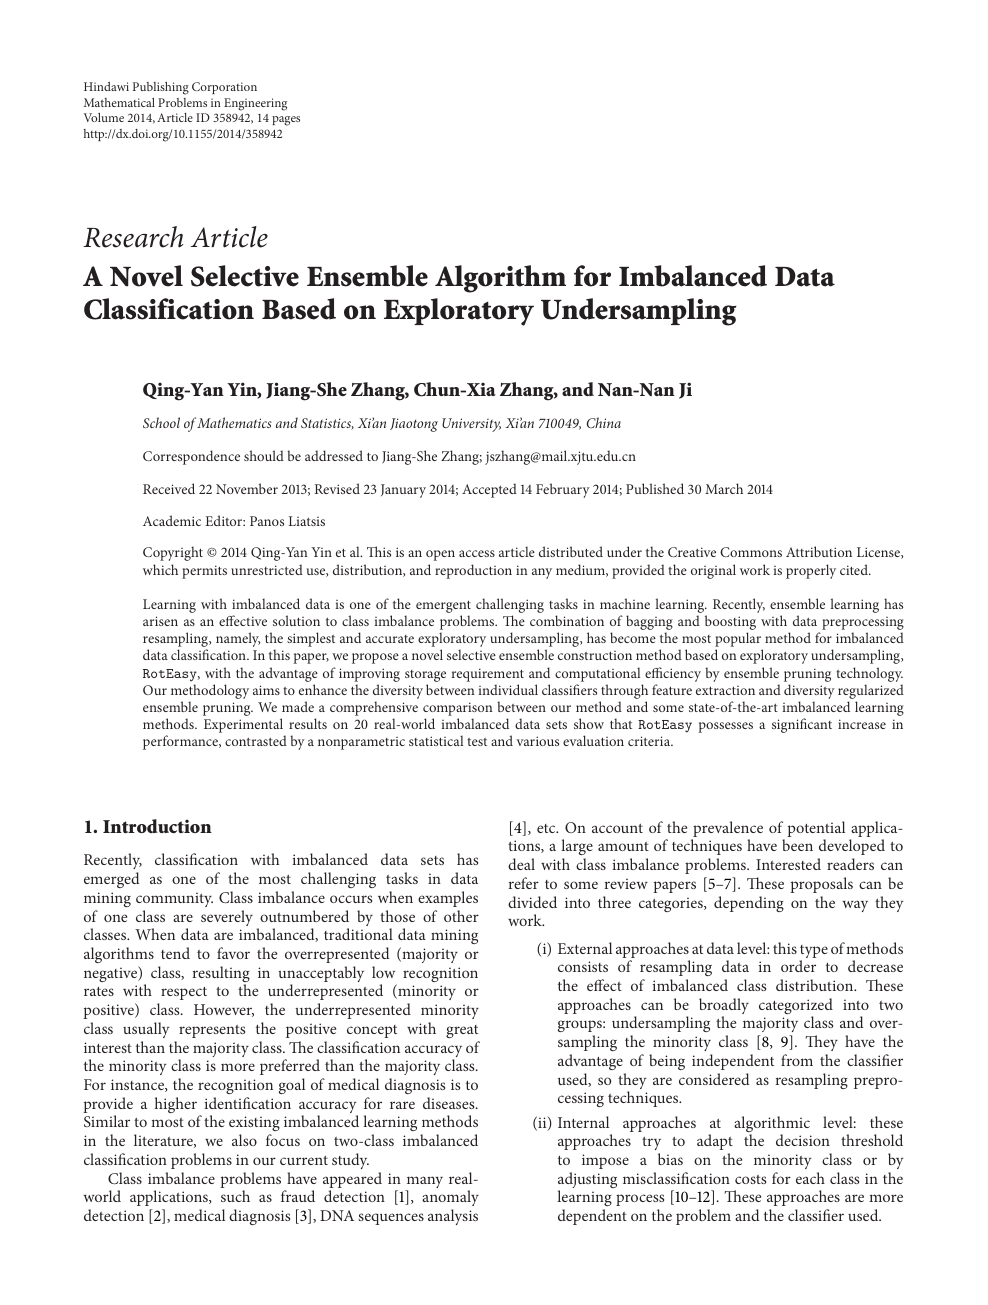 A Novel Selective Ensemble Algorithm For Imbalanced Data Classification Based On Exploratory Undersampling Topic Of Research Paper In Mathematics Download Scholarly Article Pdf And Read For Free On Cyberleninka Open Science